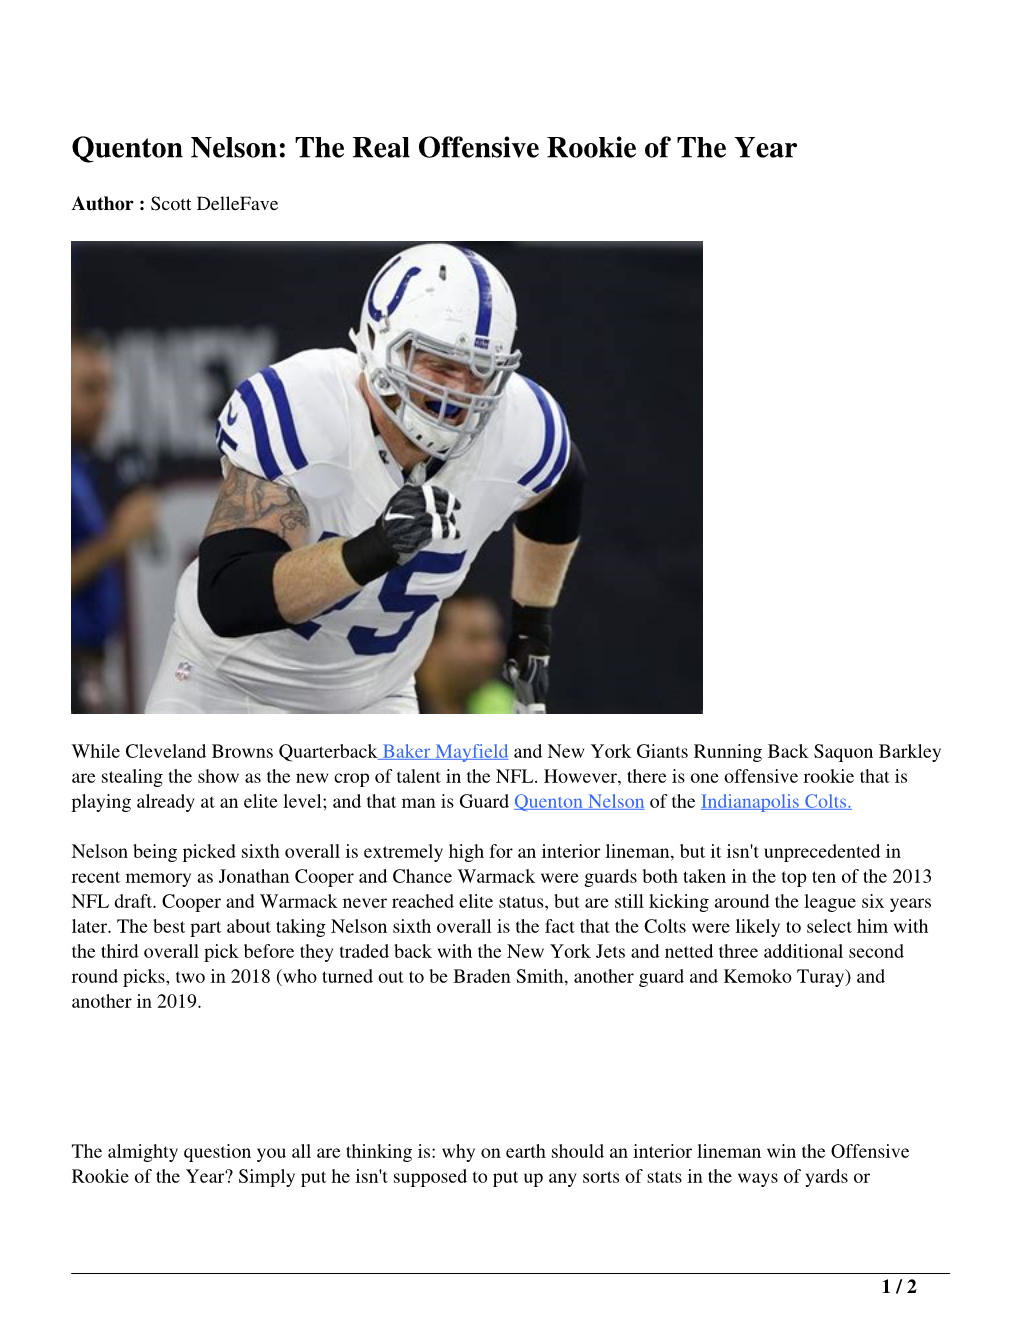 Quenton Nelson: the Real Offensive Rookie of the Year